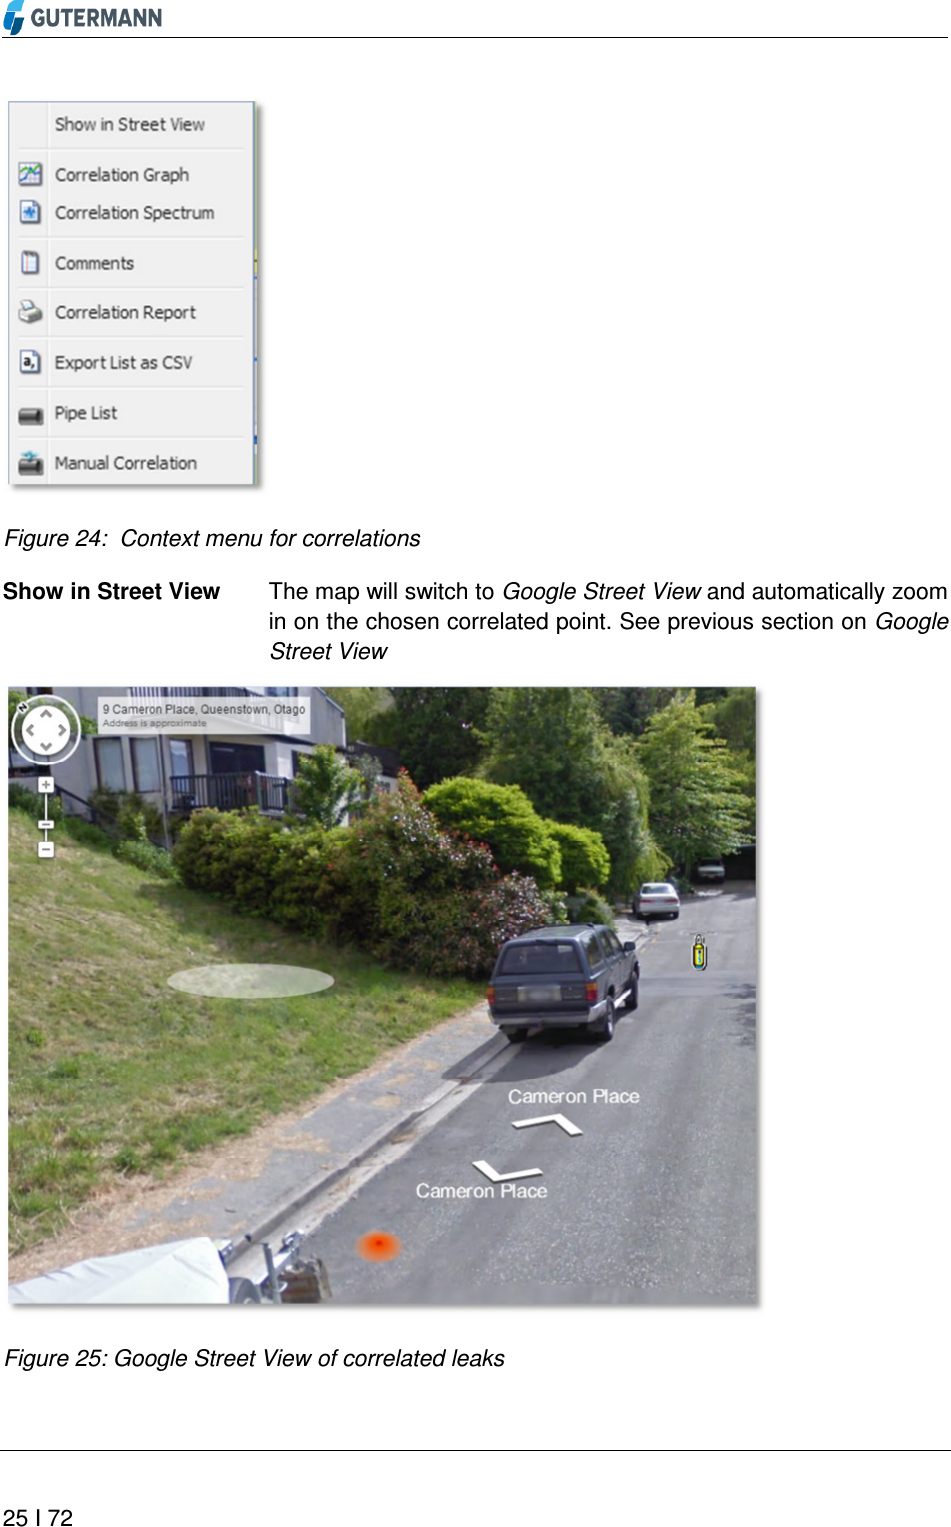       25 I 72   Figure 24:  Context menu for correlations The map will switch to Google Street View and automatically zoom in on the chosen correlated point. See previous section on Google Street View  Figure 25: Google Street View of correlated leaks    Show in Street View 